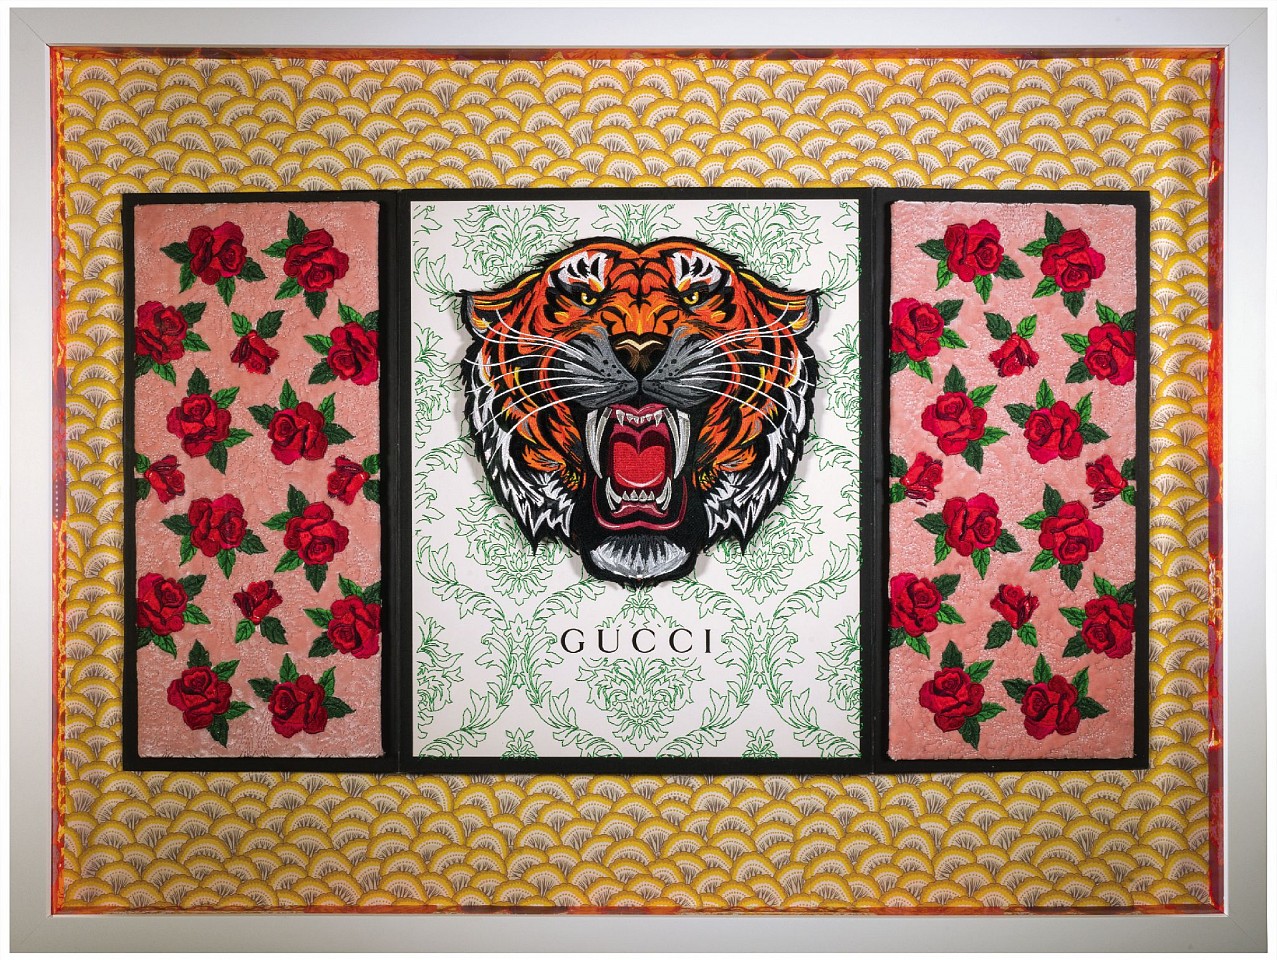 Stephen Wilson, Gucci Tiger Trifold
2017, Mixed Media